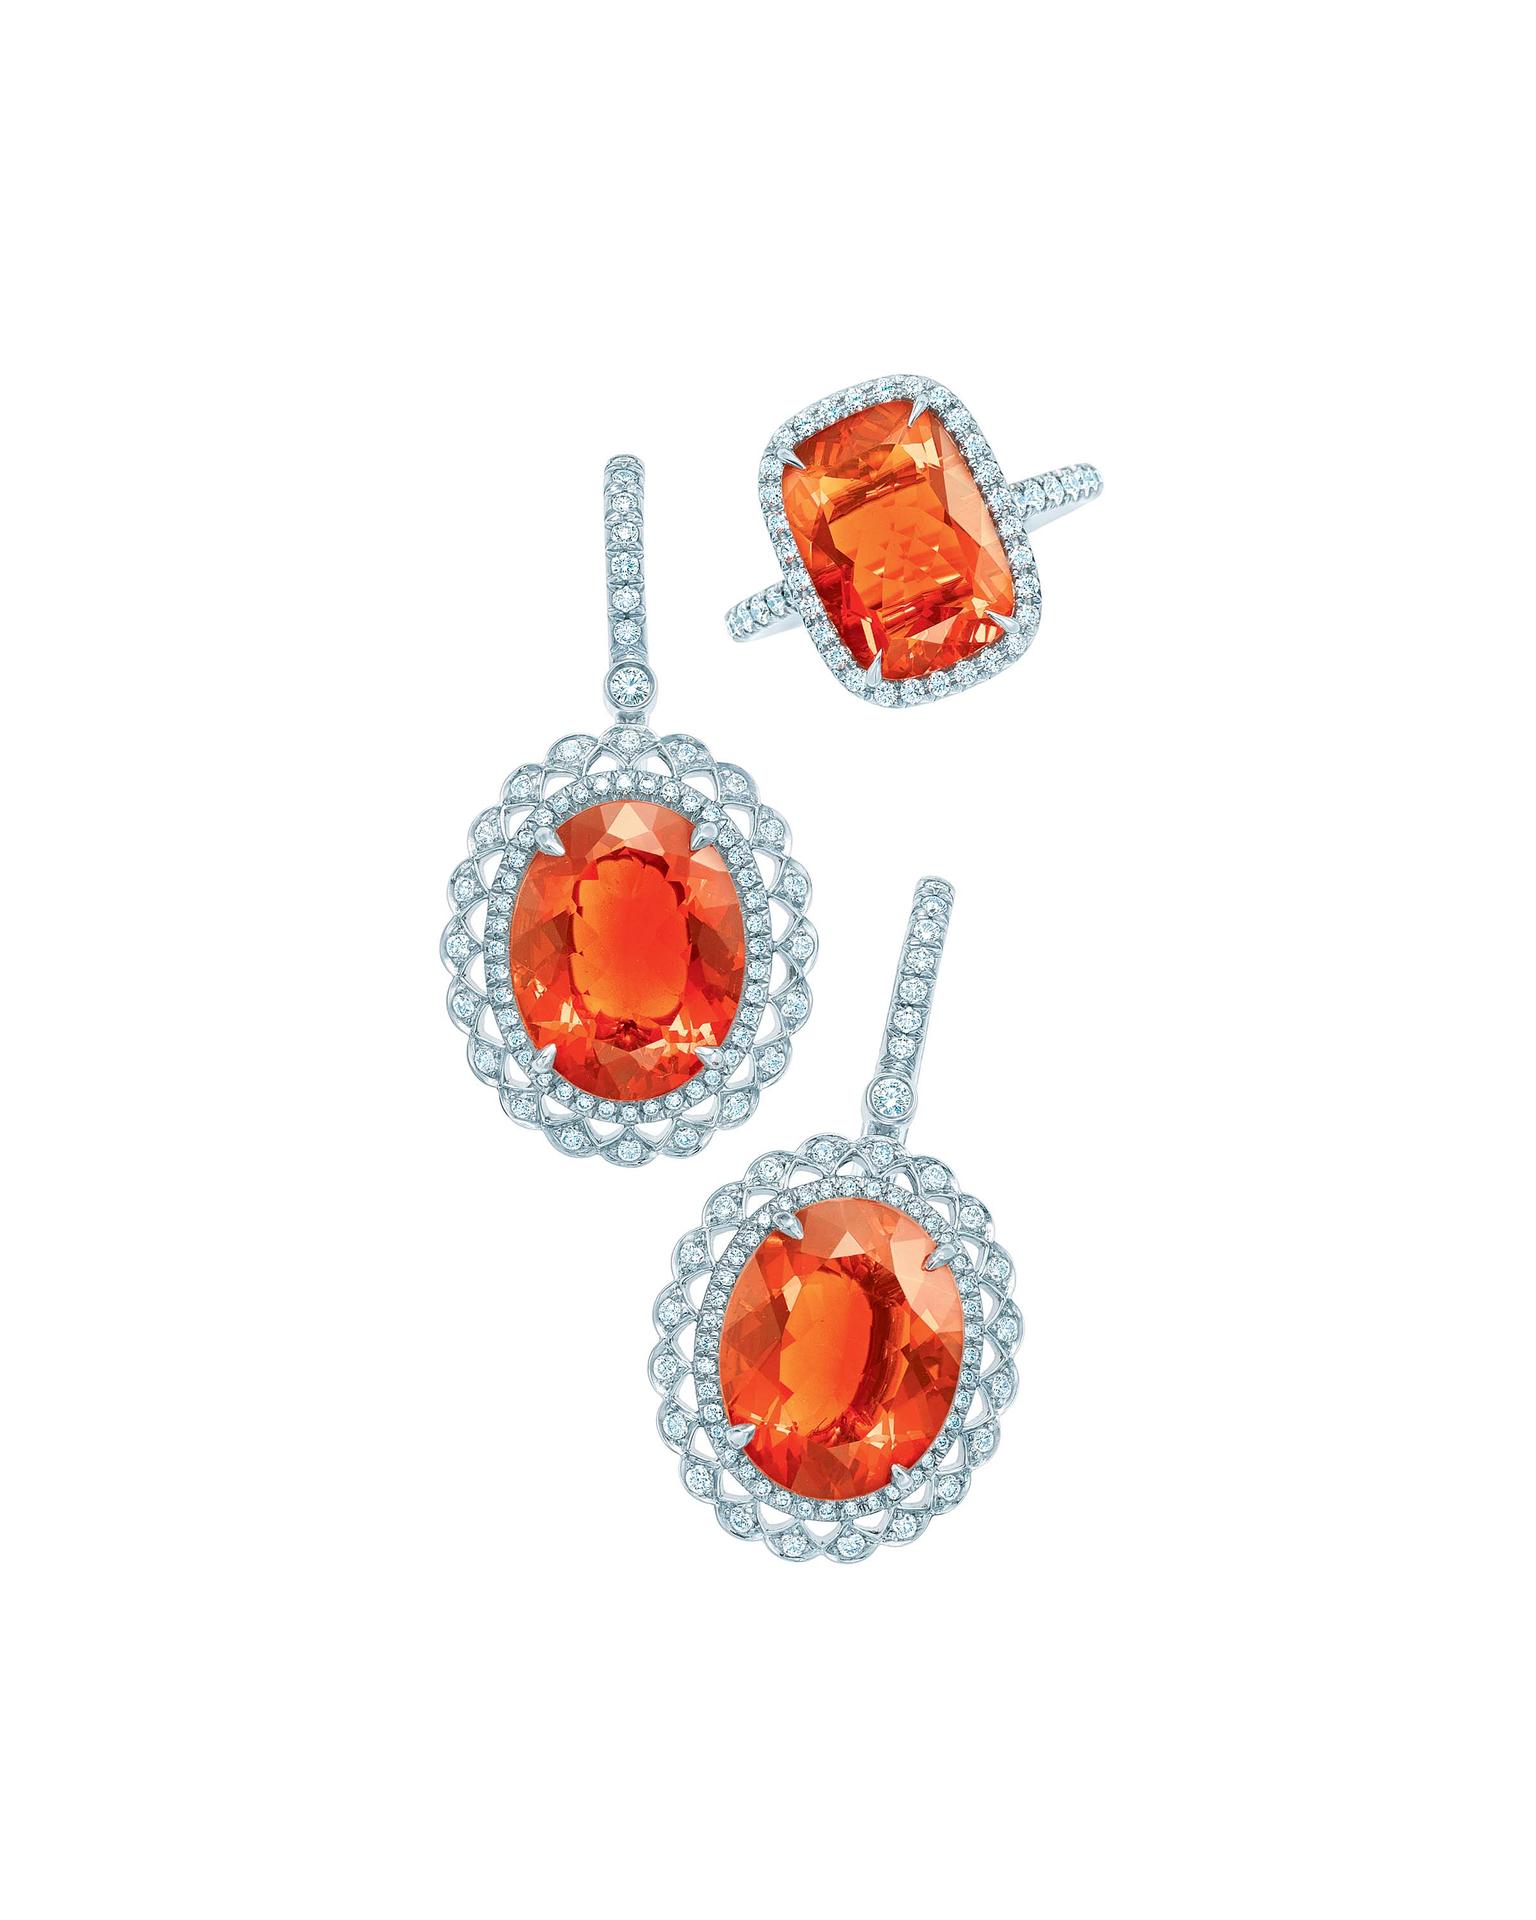 Tiffany & Co. Blue Book Collection fire opal earrings and ring with diamonds set in platinum